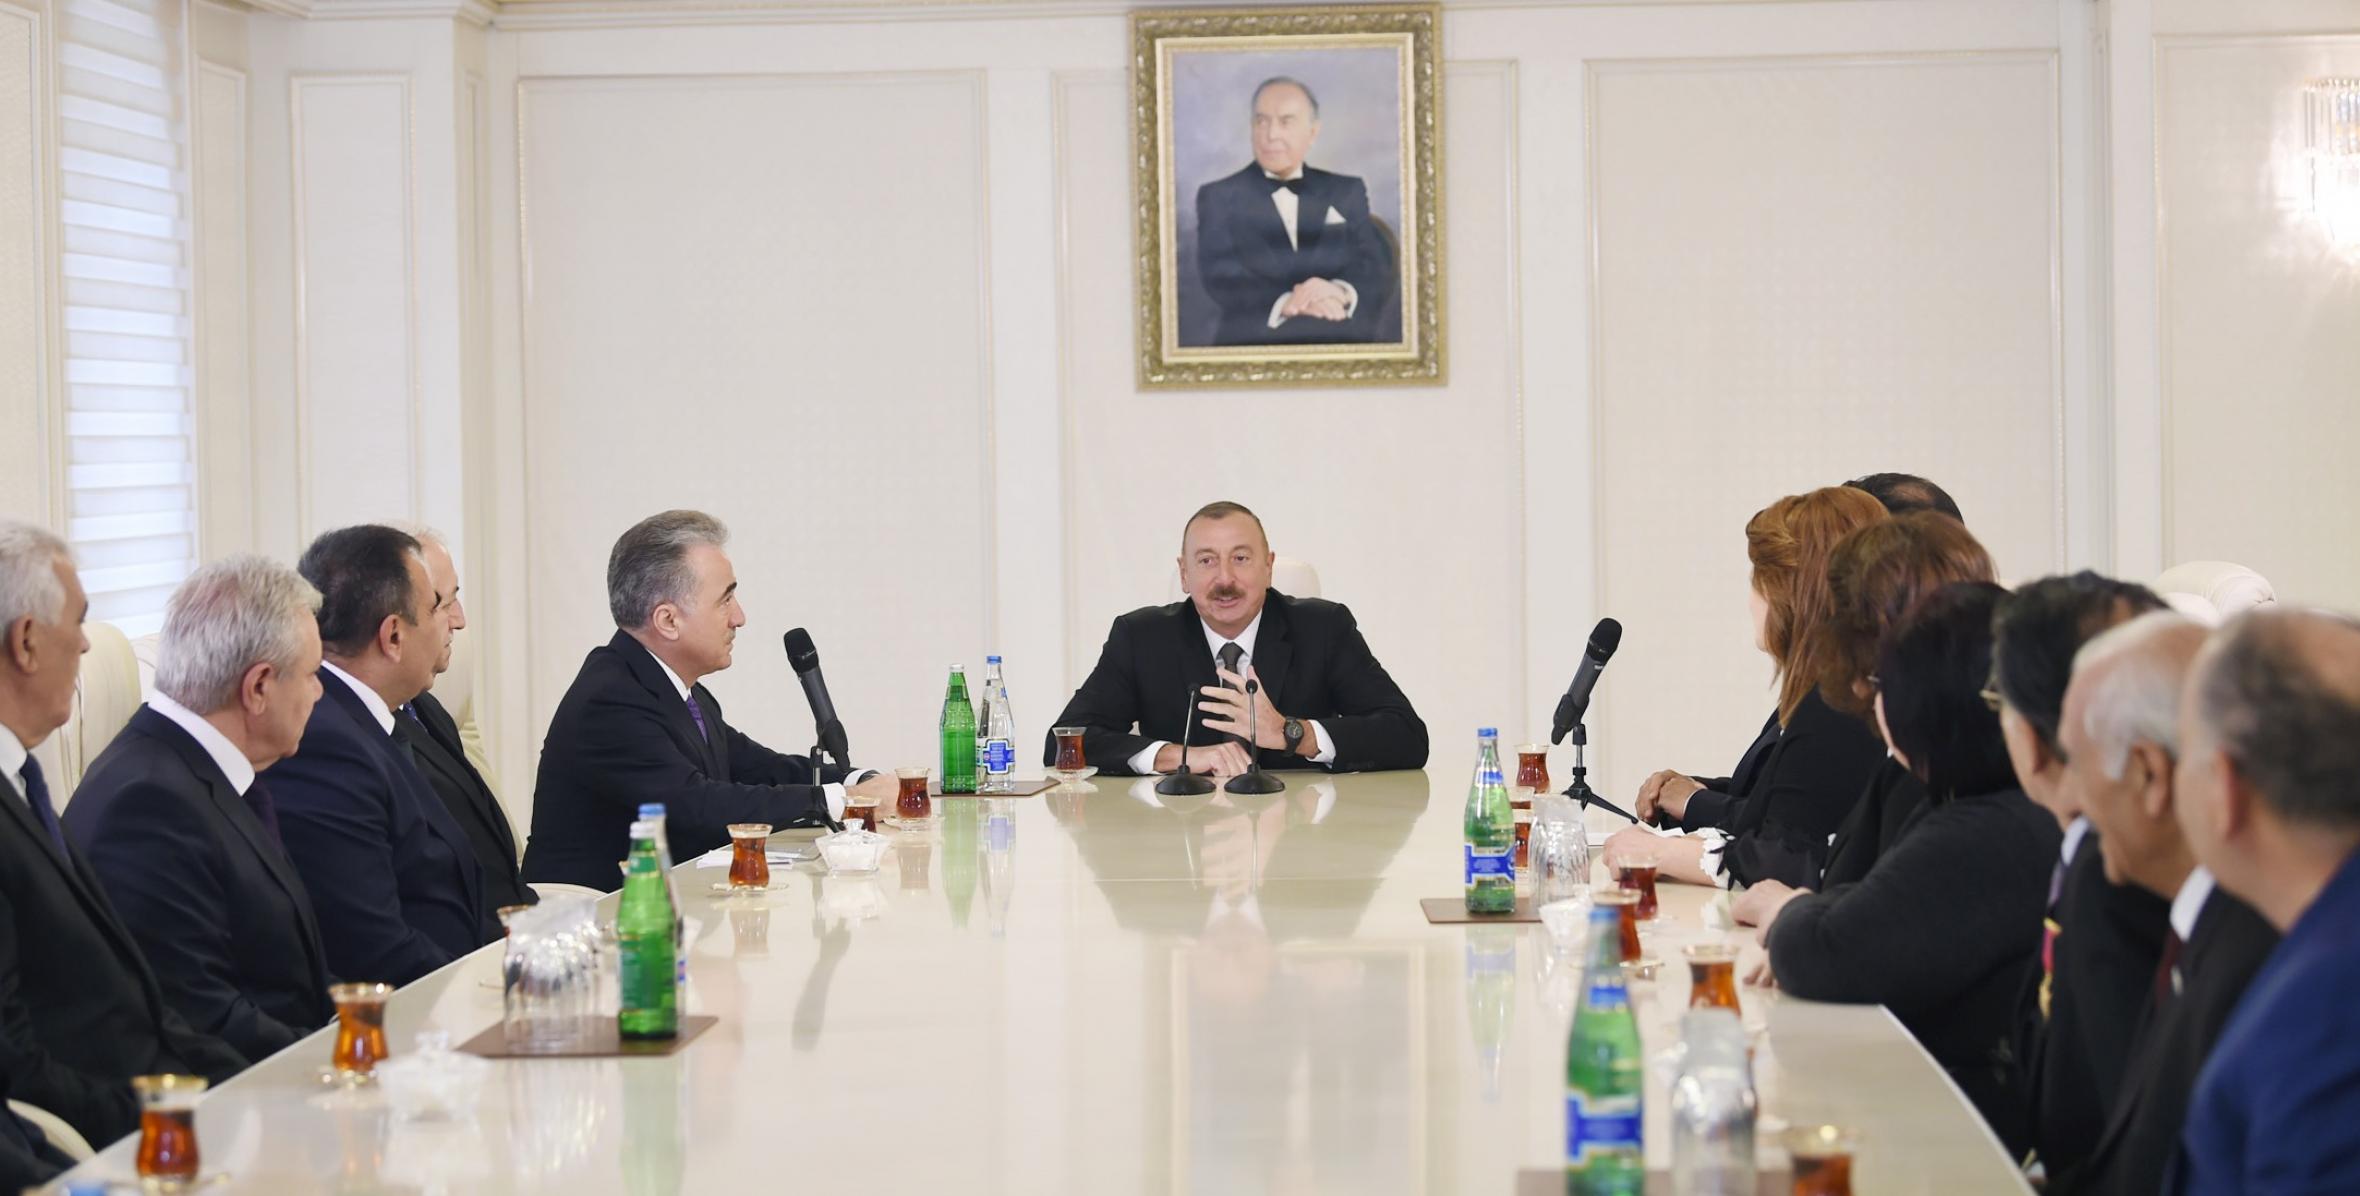 Speech by Ilham Aliyev at  the opening of the new building of Ganja State Philharmonic